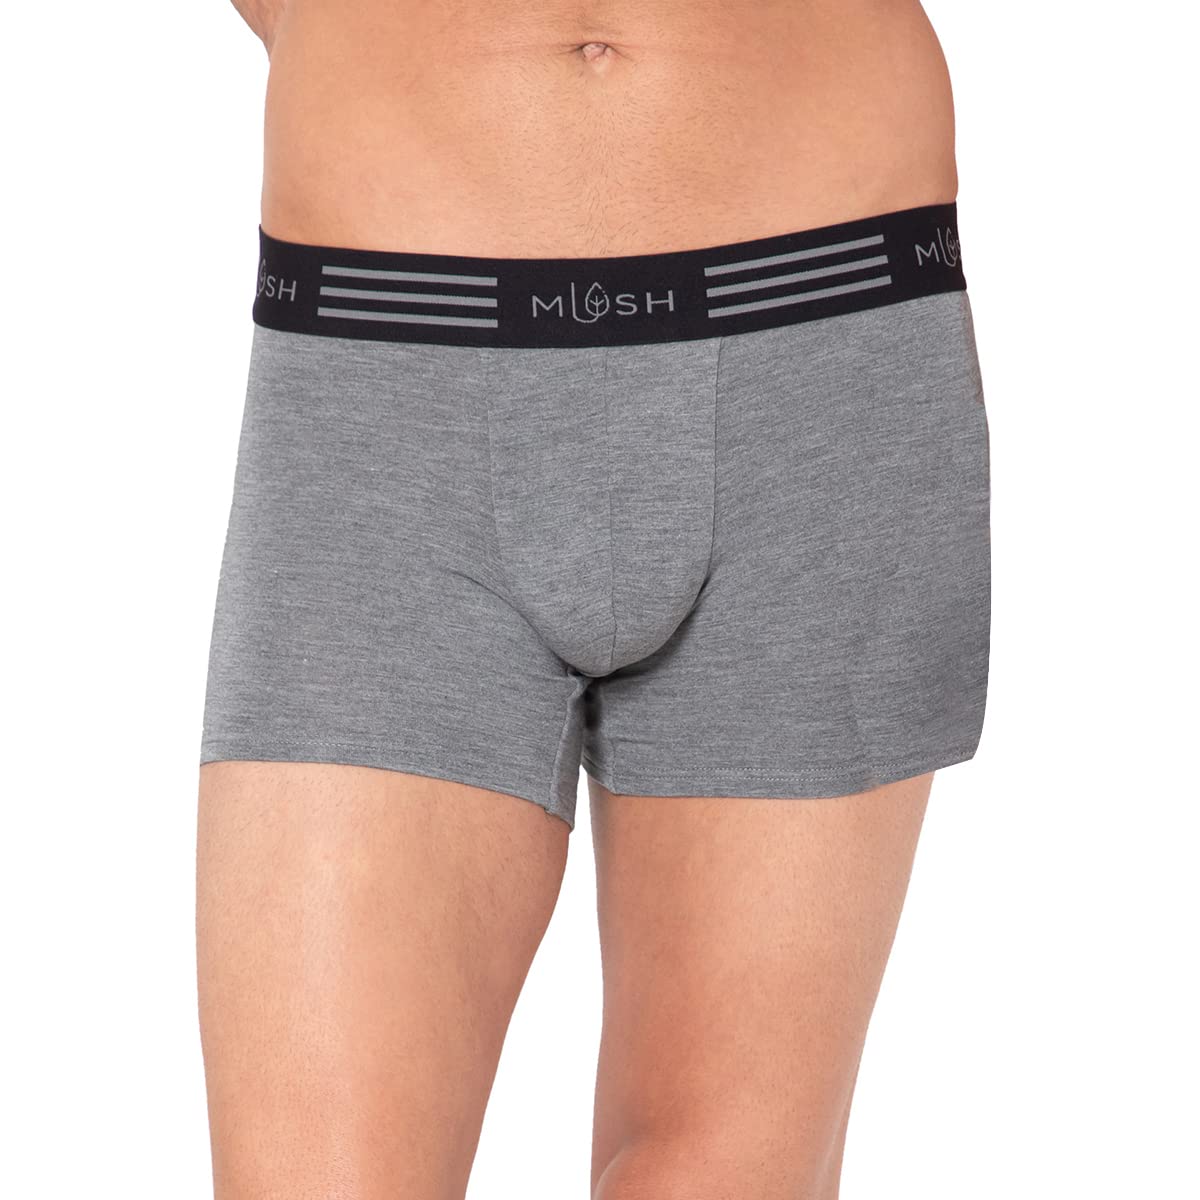 Mush Ultra Soft, Breathable, Feather Light Men's Bamboo Trunk || Naturally Anti-Odor and Anti-Microbial Bamboo Innerwear (L, Grey)